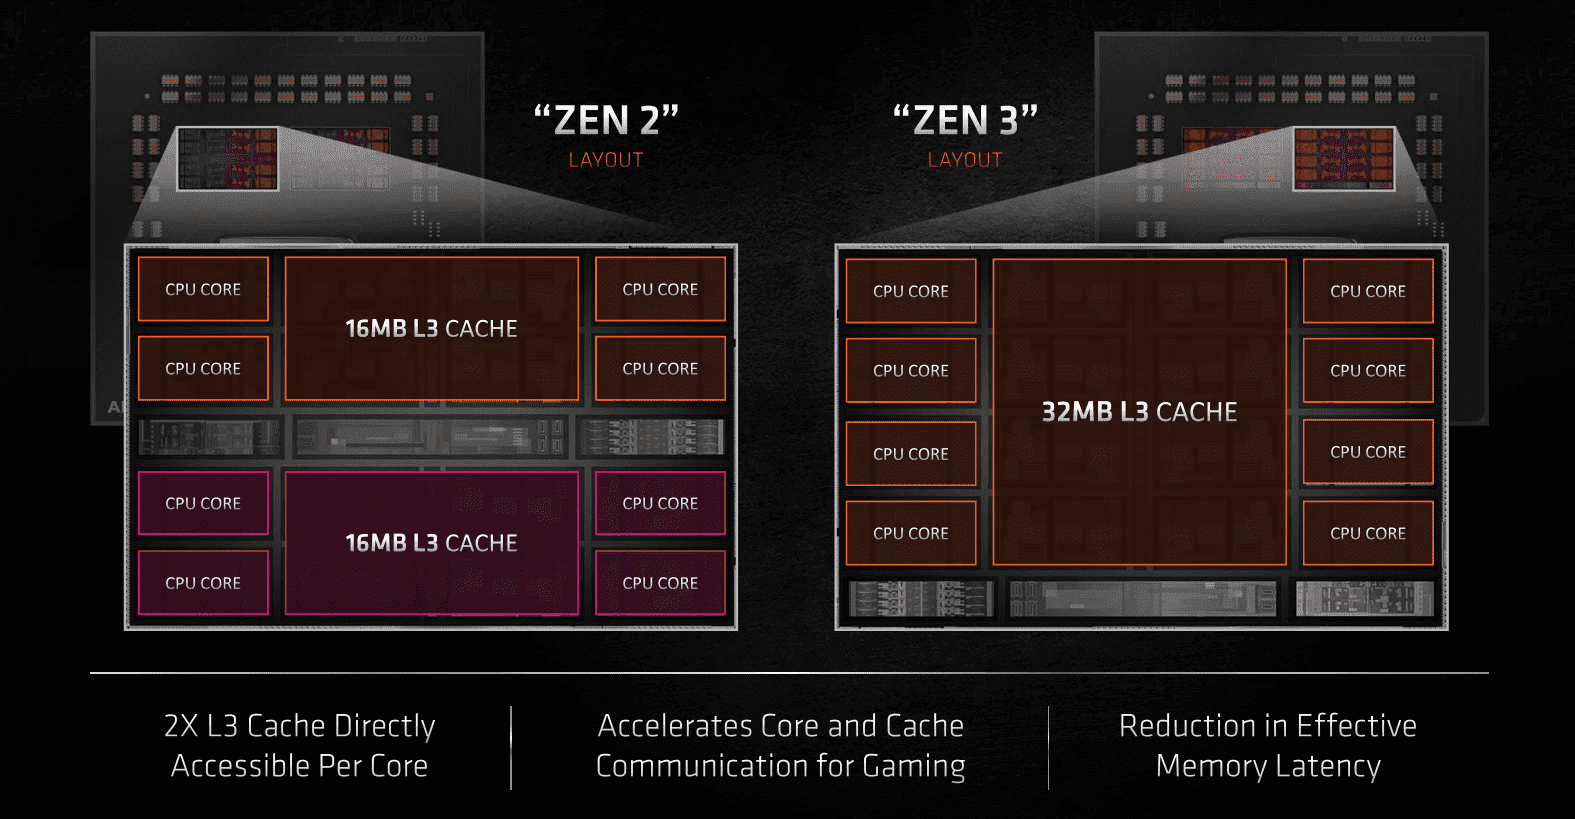 This image compares the core layouts of AMD's Zen 2 and Zen 3 Architectures